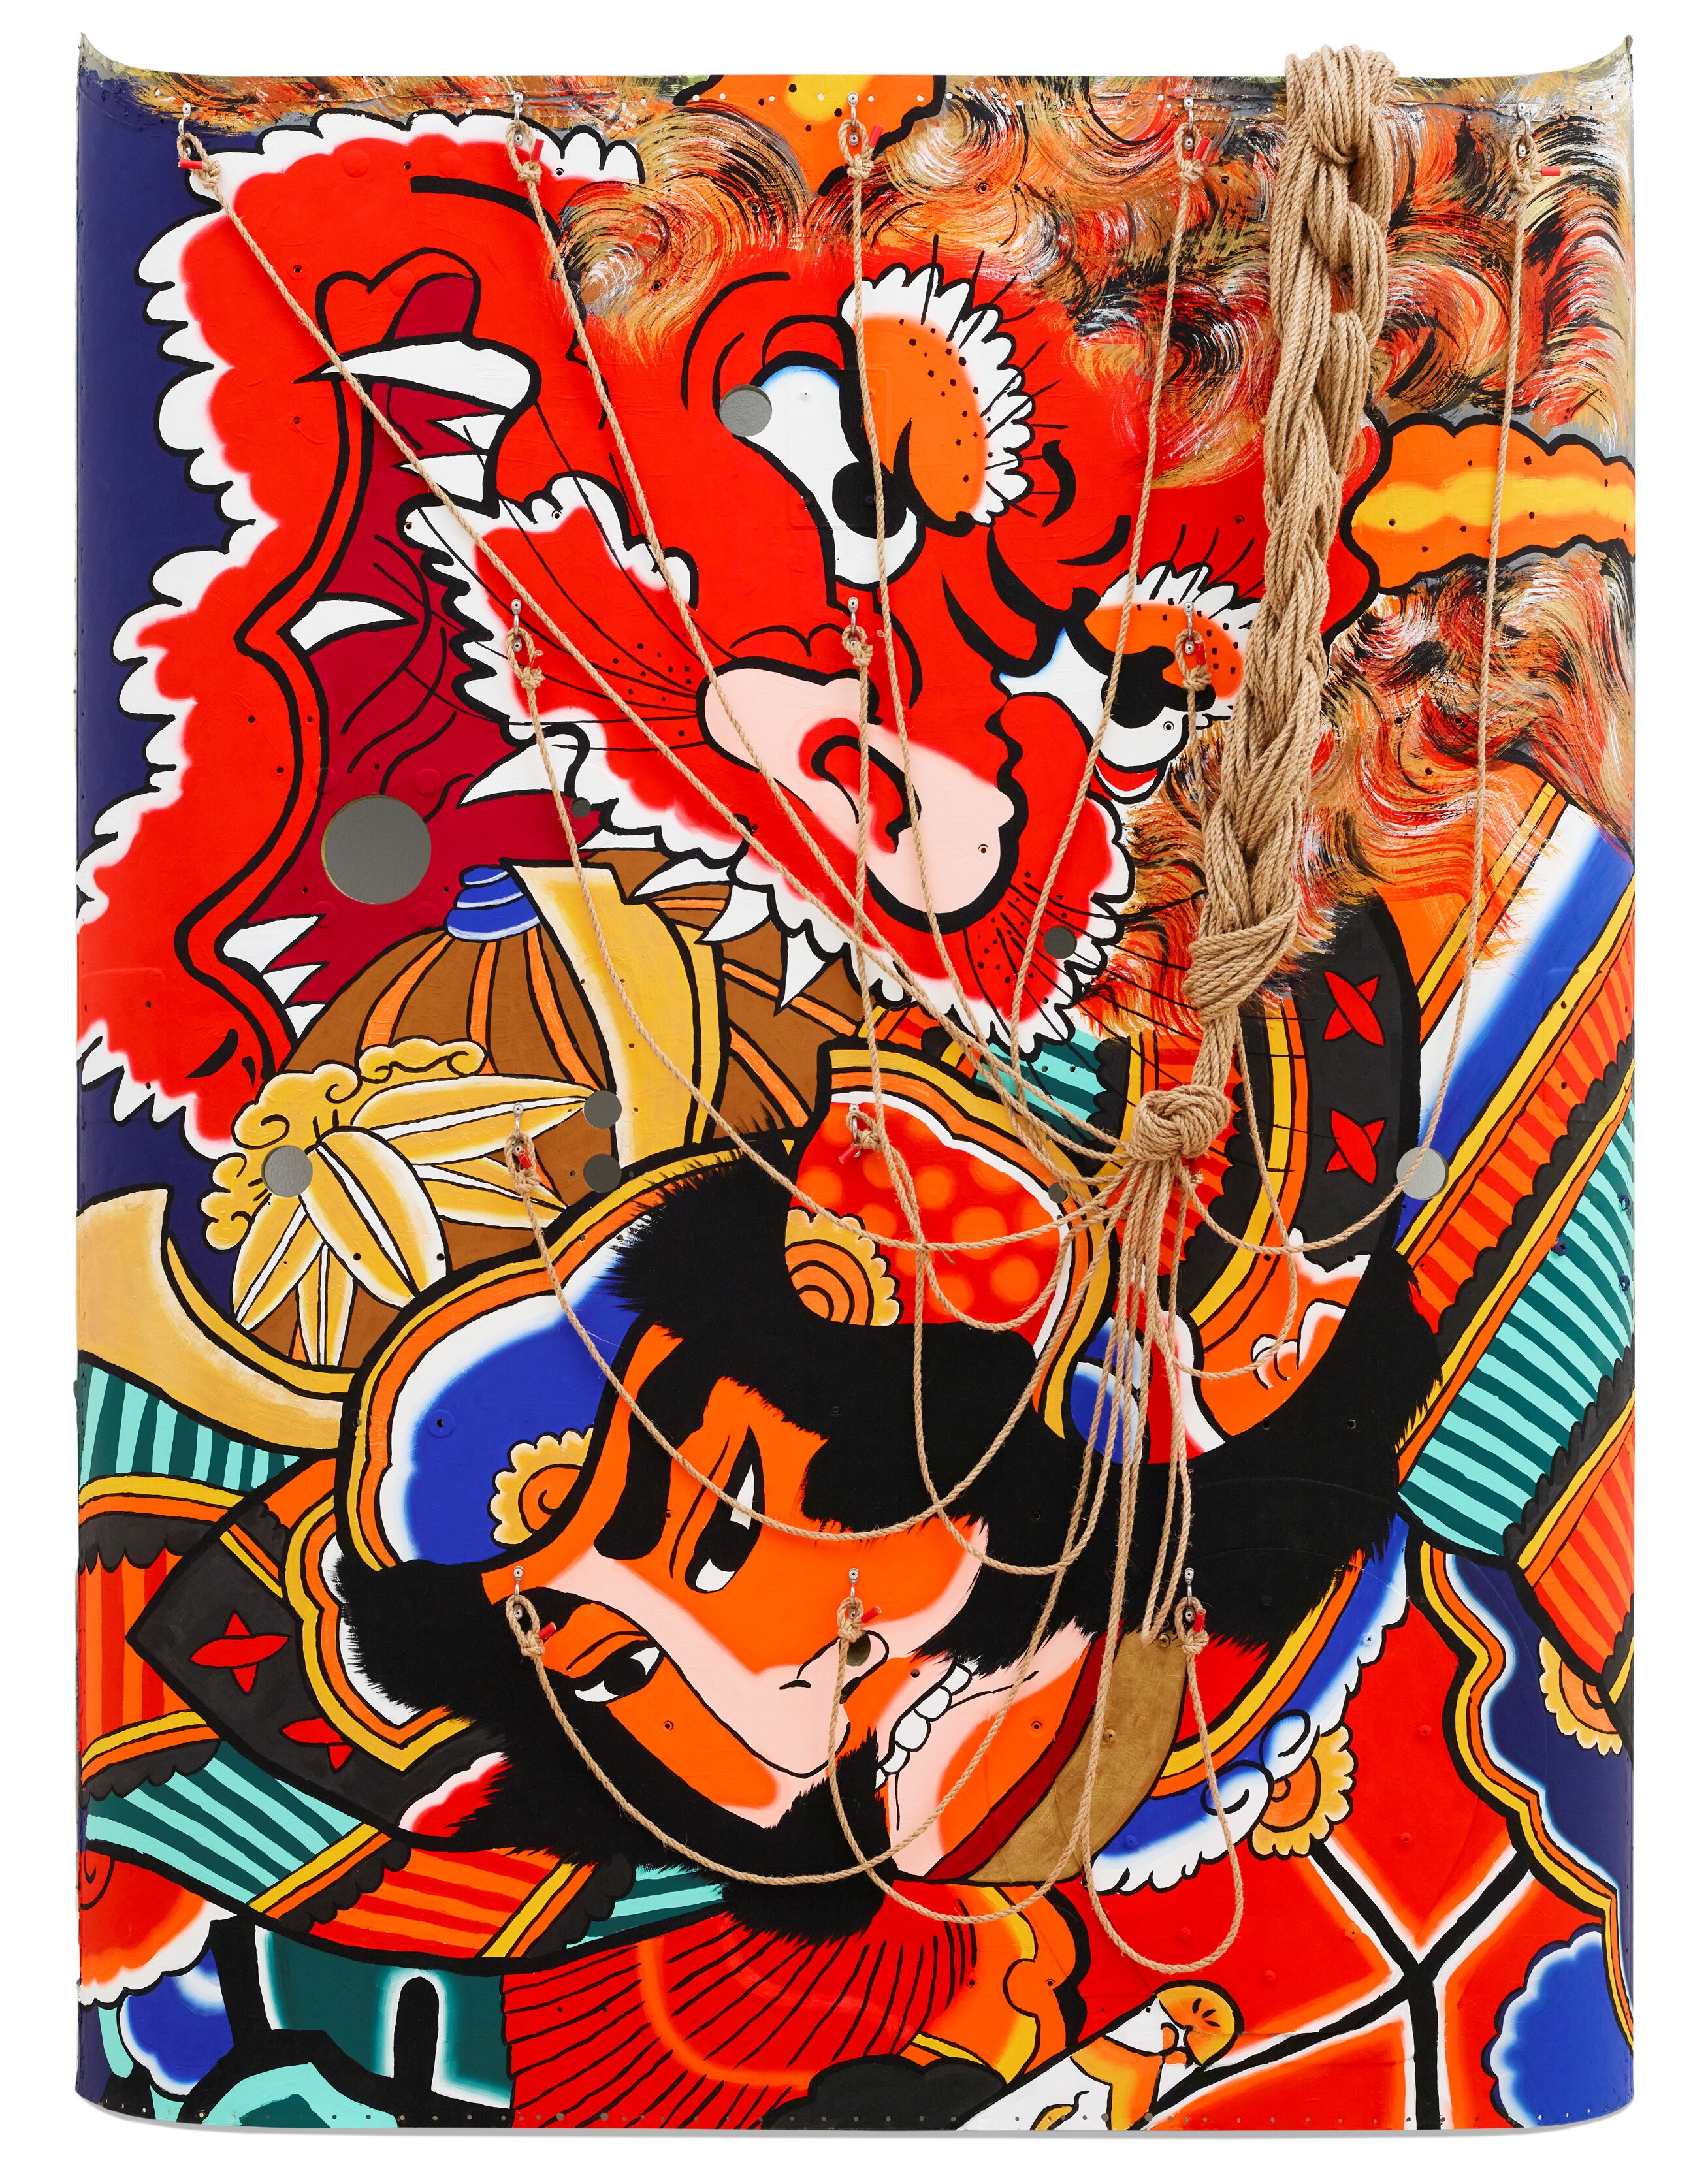 A painting of a warrior and a demon fighting, painting in vivid shades of mostly orange and red